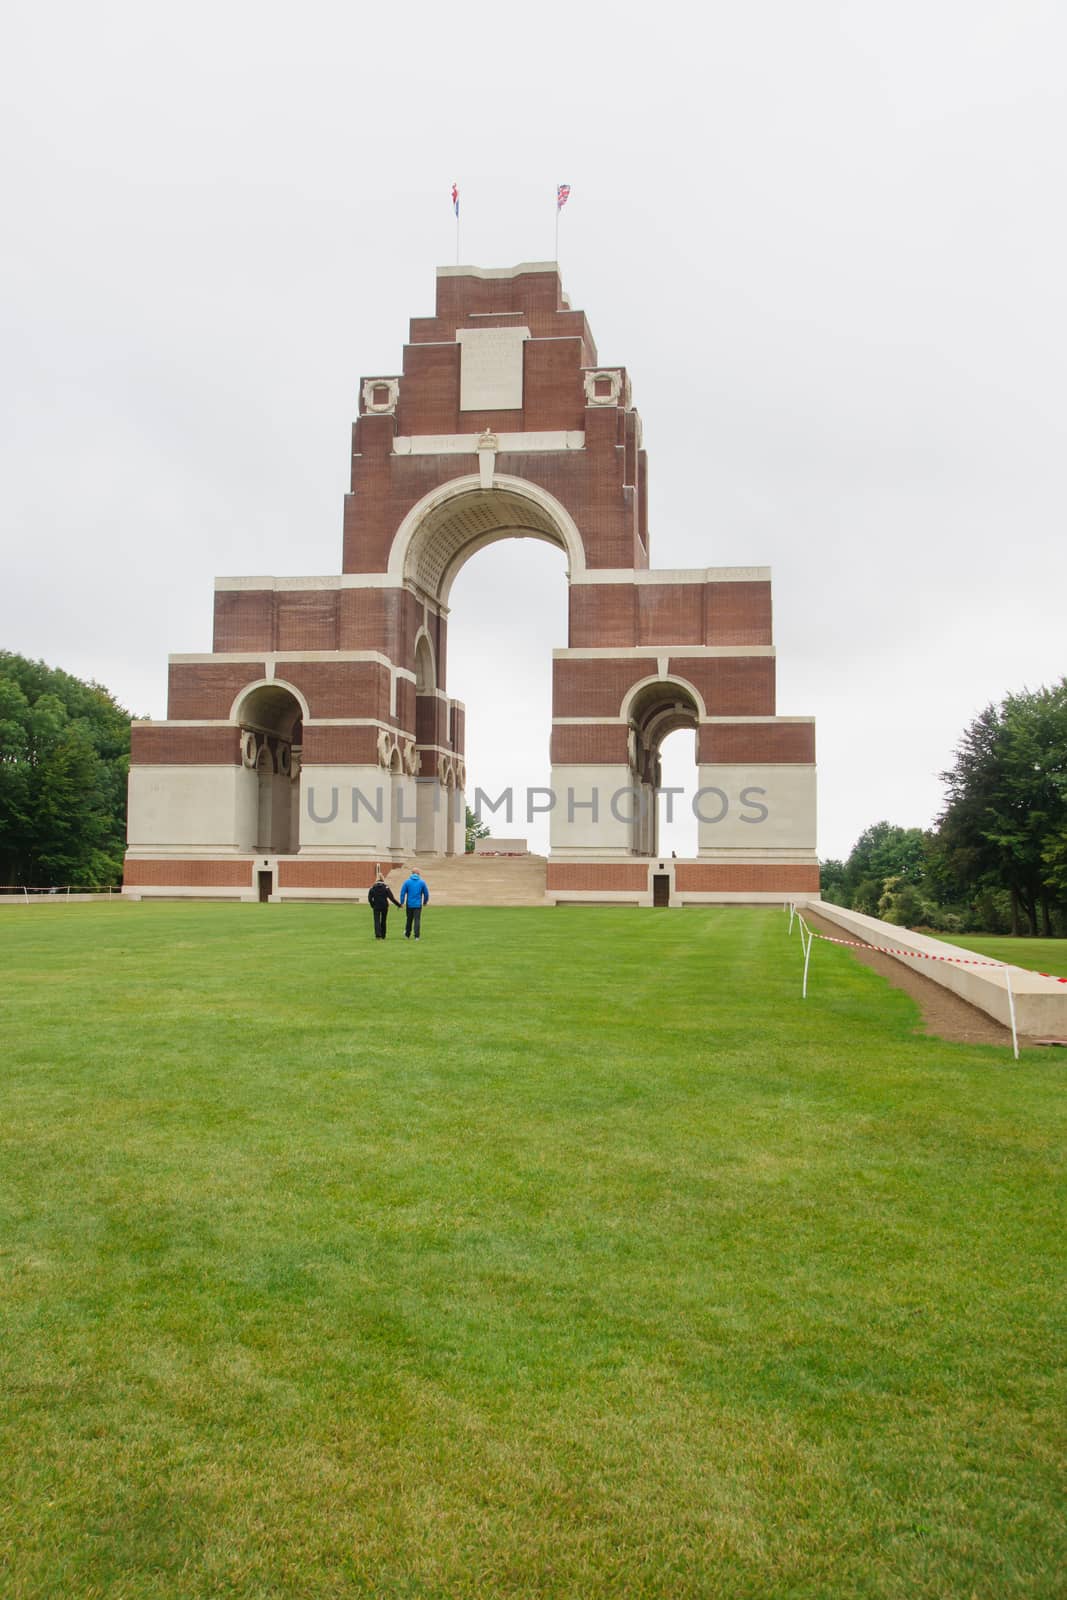 The Franco-British Memorial in Thiepval. This is a memorial for missing soldiers from the battle of the Somme in 1916 (WWI). Picardy, France